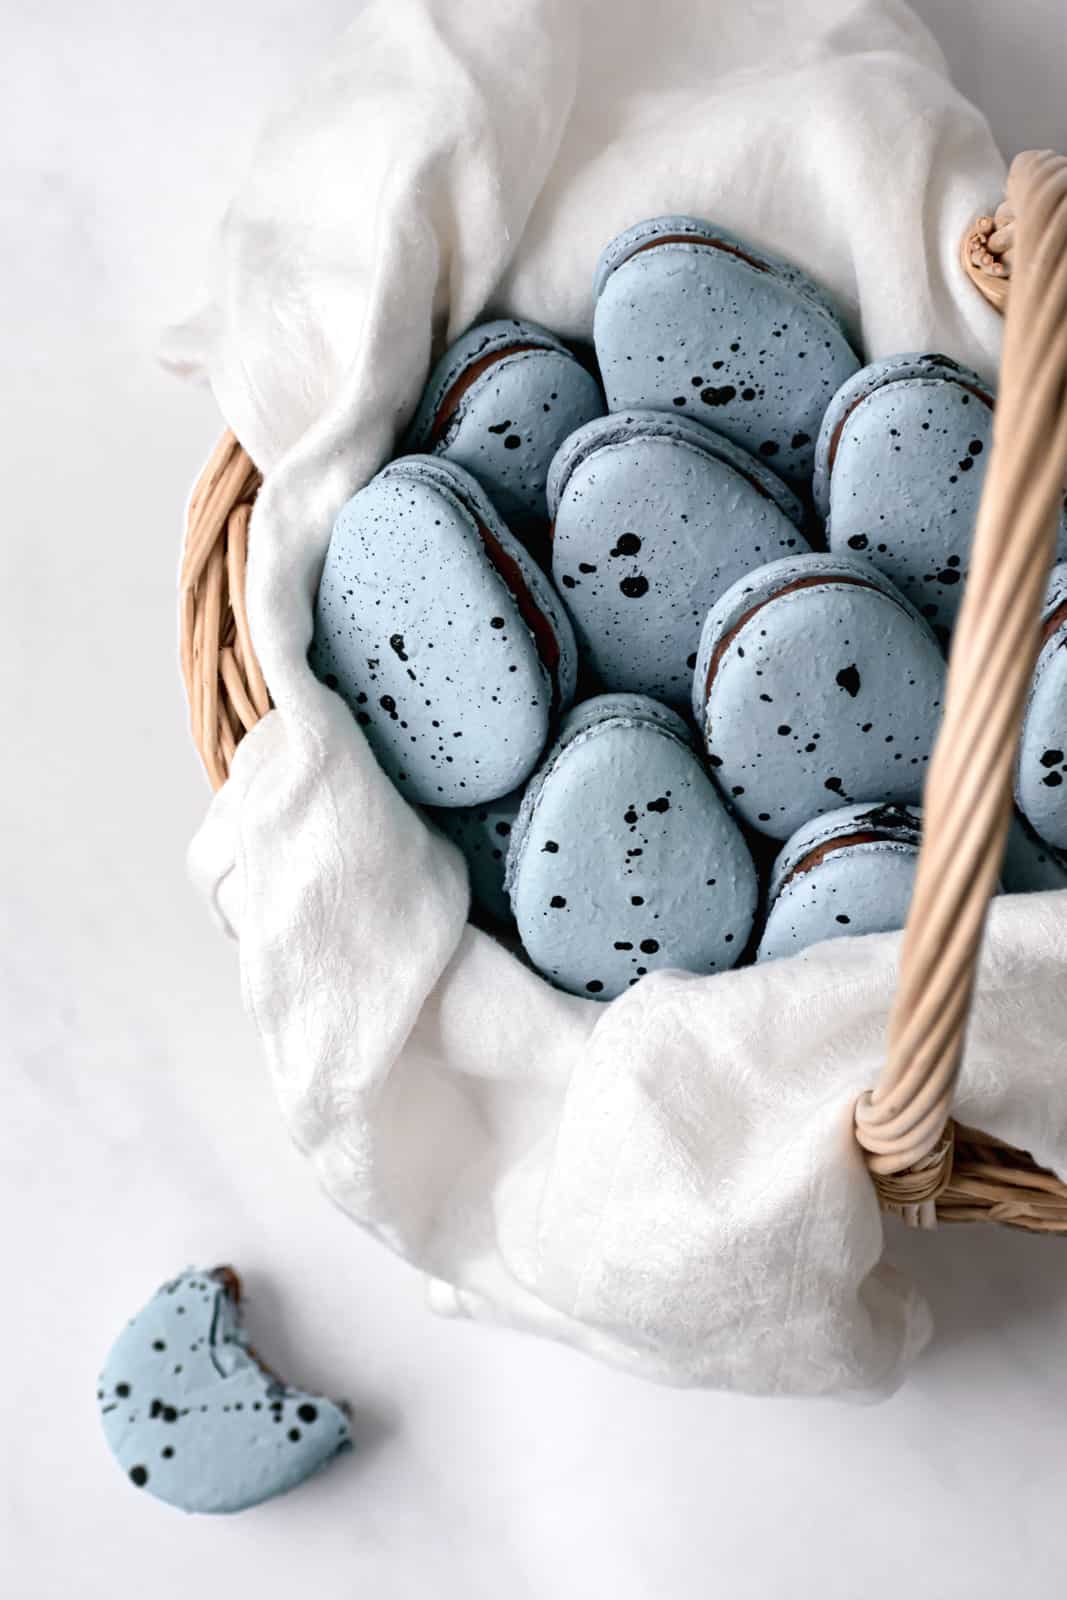 Robin's Egg Macarons with chocolate french buttercream in a basket lined with a white linen.